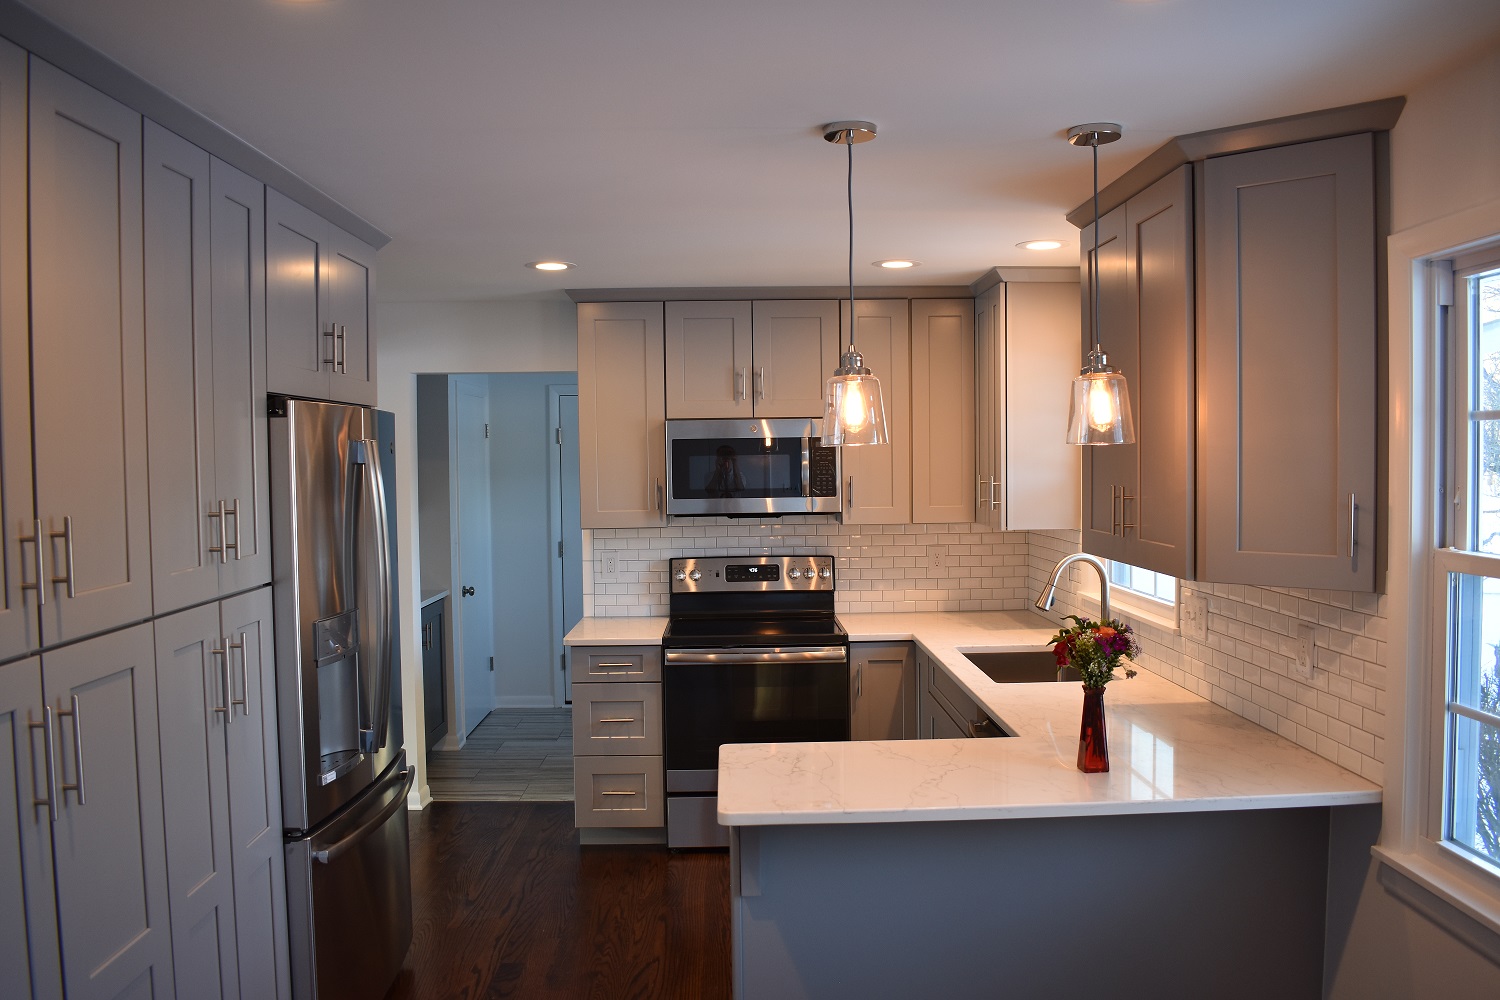 Kitchen Renovation, Call (440)285-8516 for more information